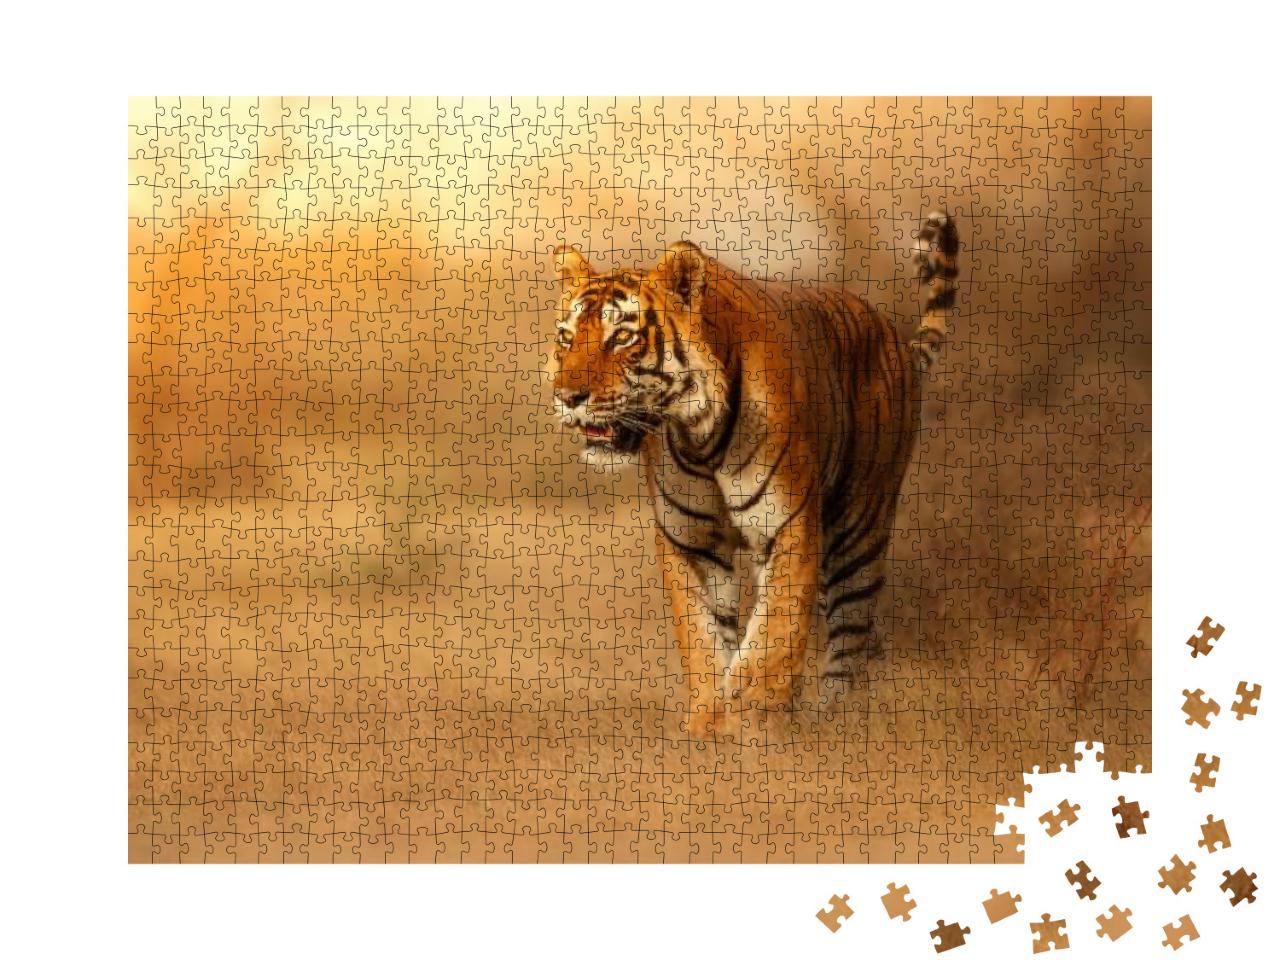 Great Tiger Male in the Nature Habitat. Tiger Walk During... Jigsaw Puzzle with 1000 pieces